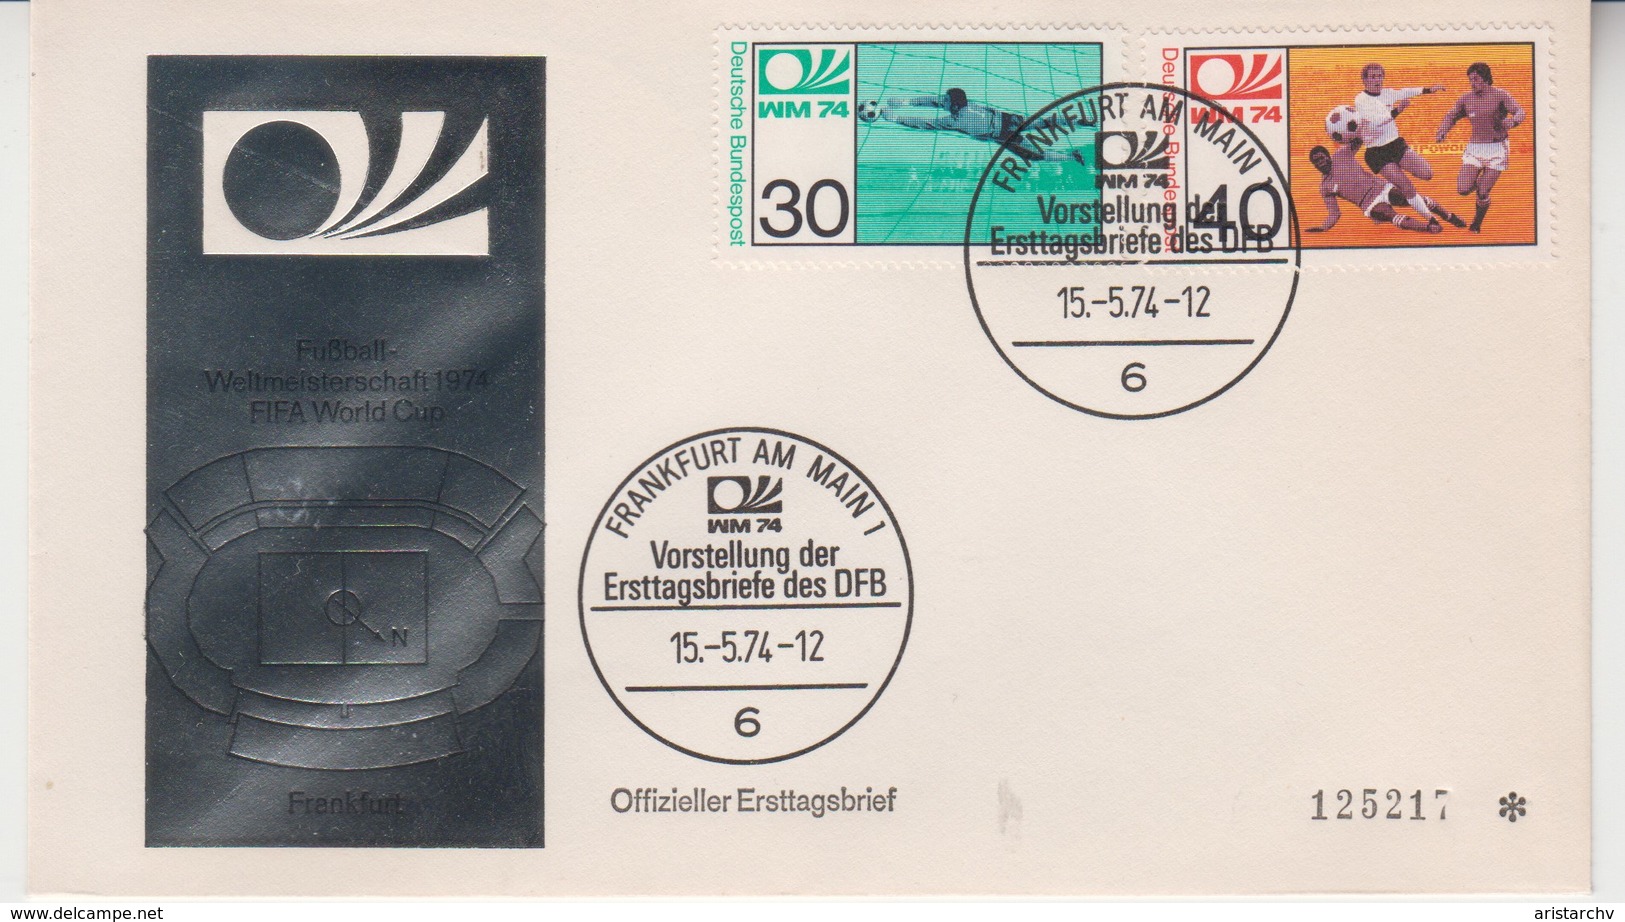 GERMANY 1974 FOOTBALL WORLD CUP COVER FRANKFURT AM MAIN CANCELATION - 1974 – Germania Ovest